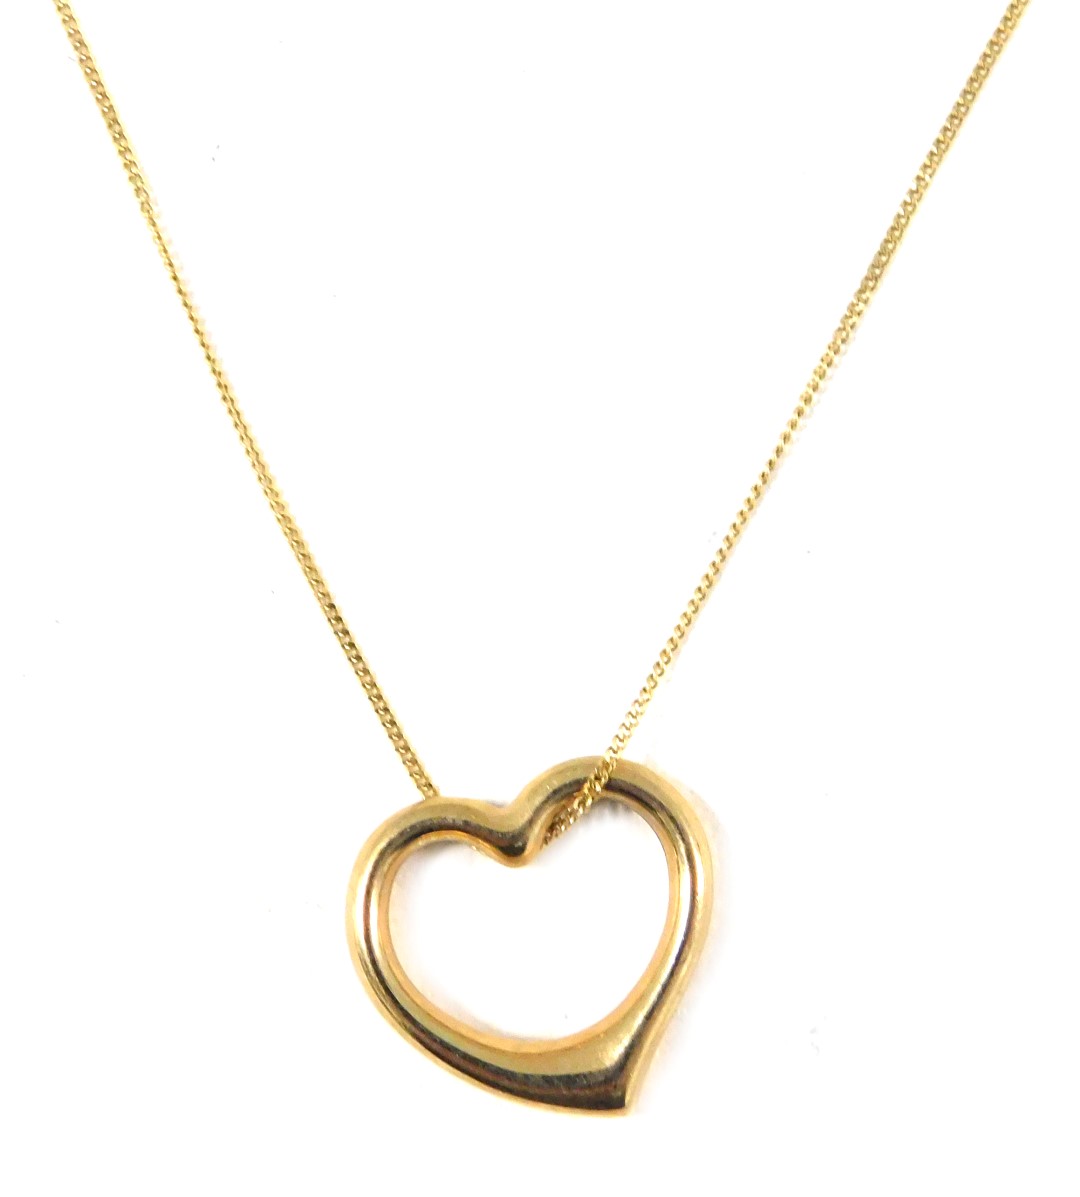 A 9ct gold heart shaped pendant and chain, the hollow heart 2cm high, on a fine link neck chain, 44c